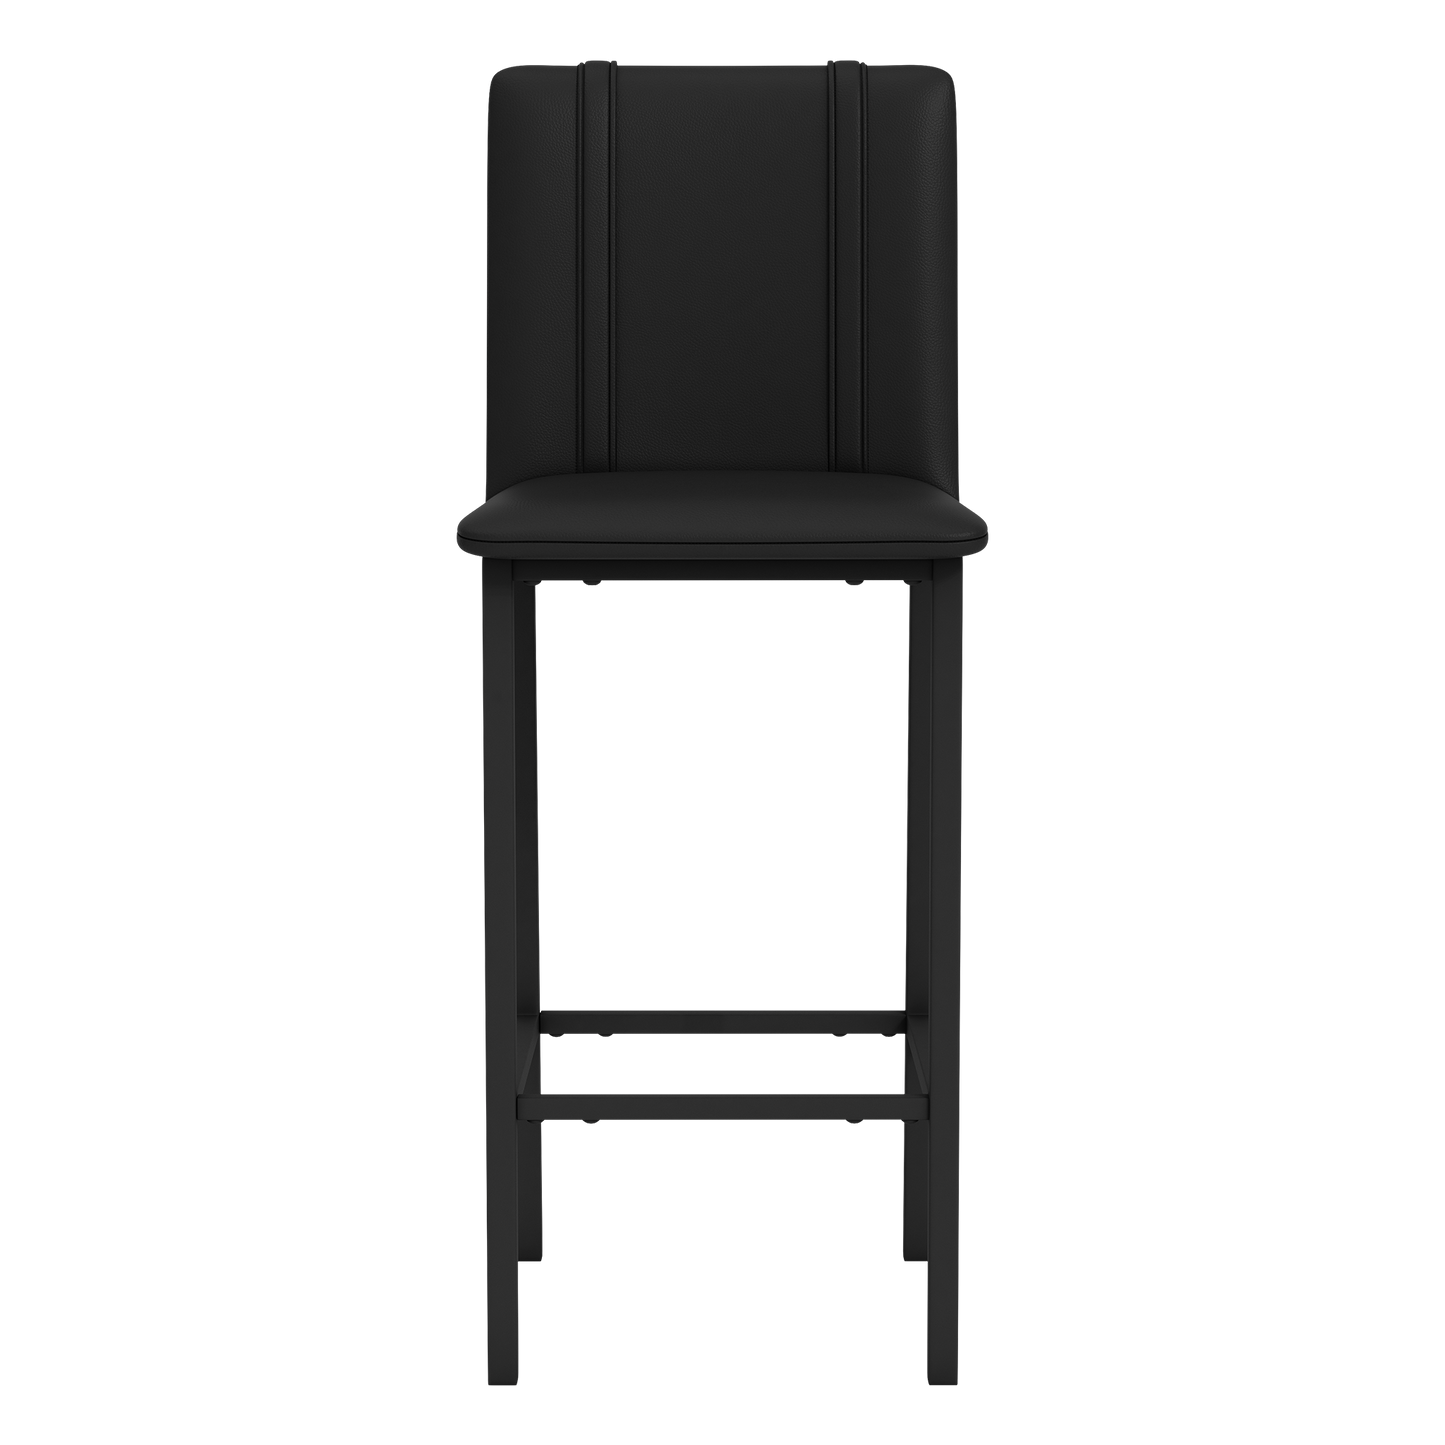 Bar Stool 500 with Mississippi State Primary Set of 2